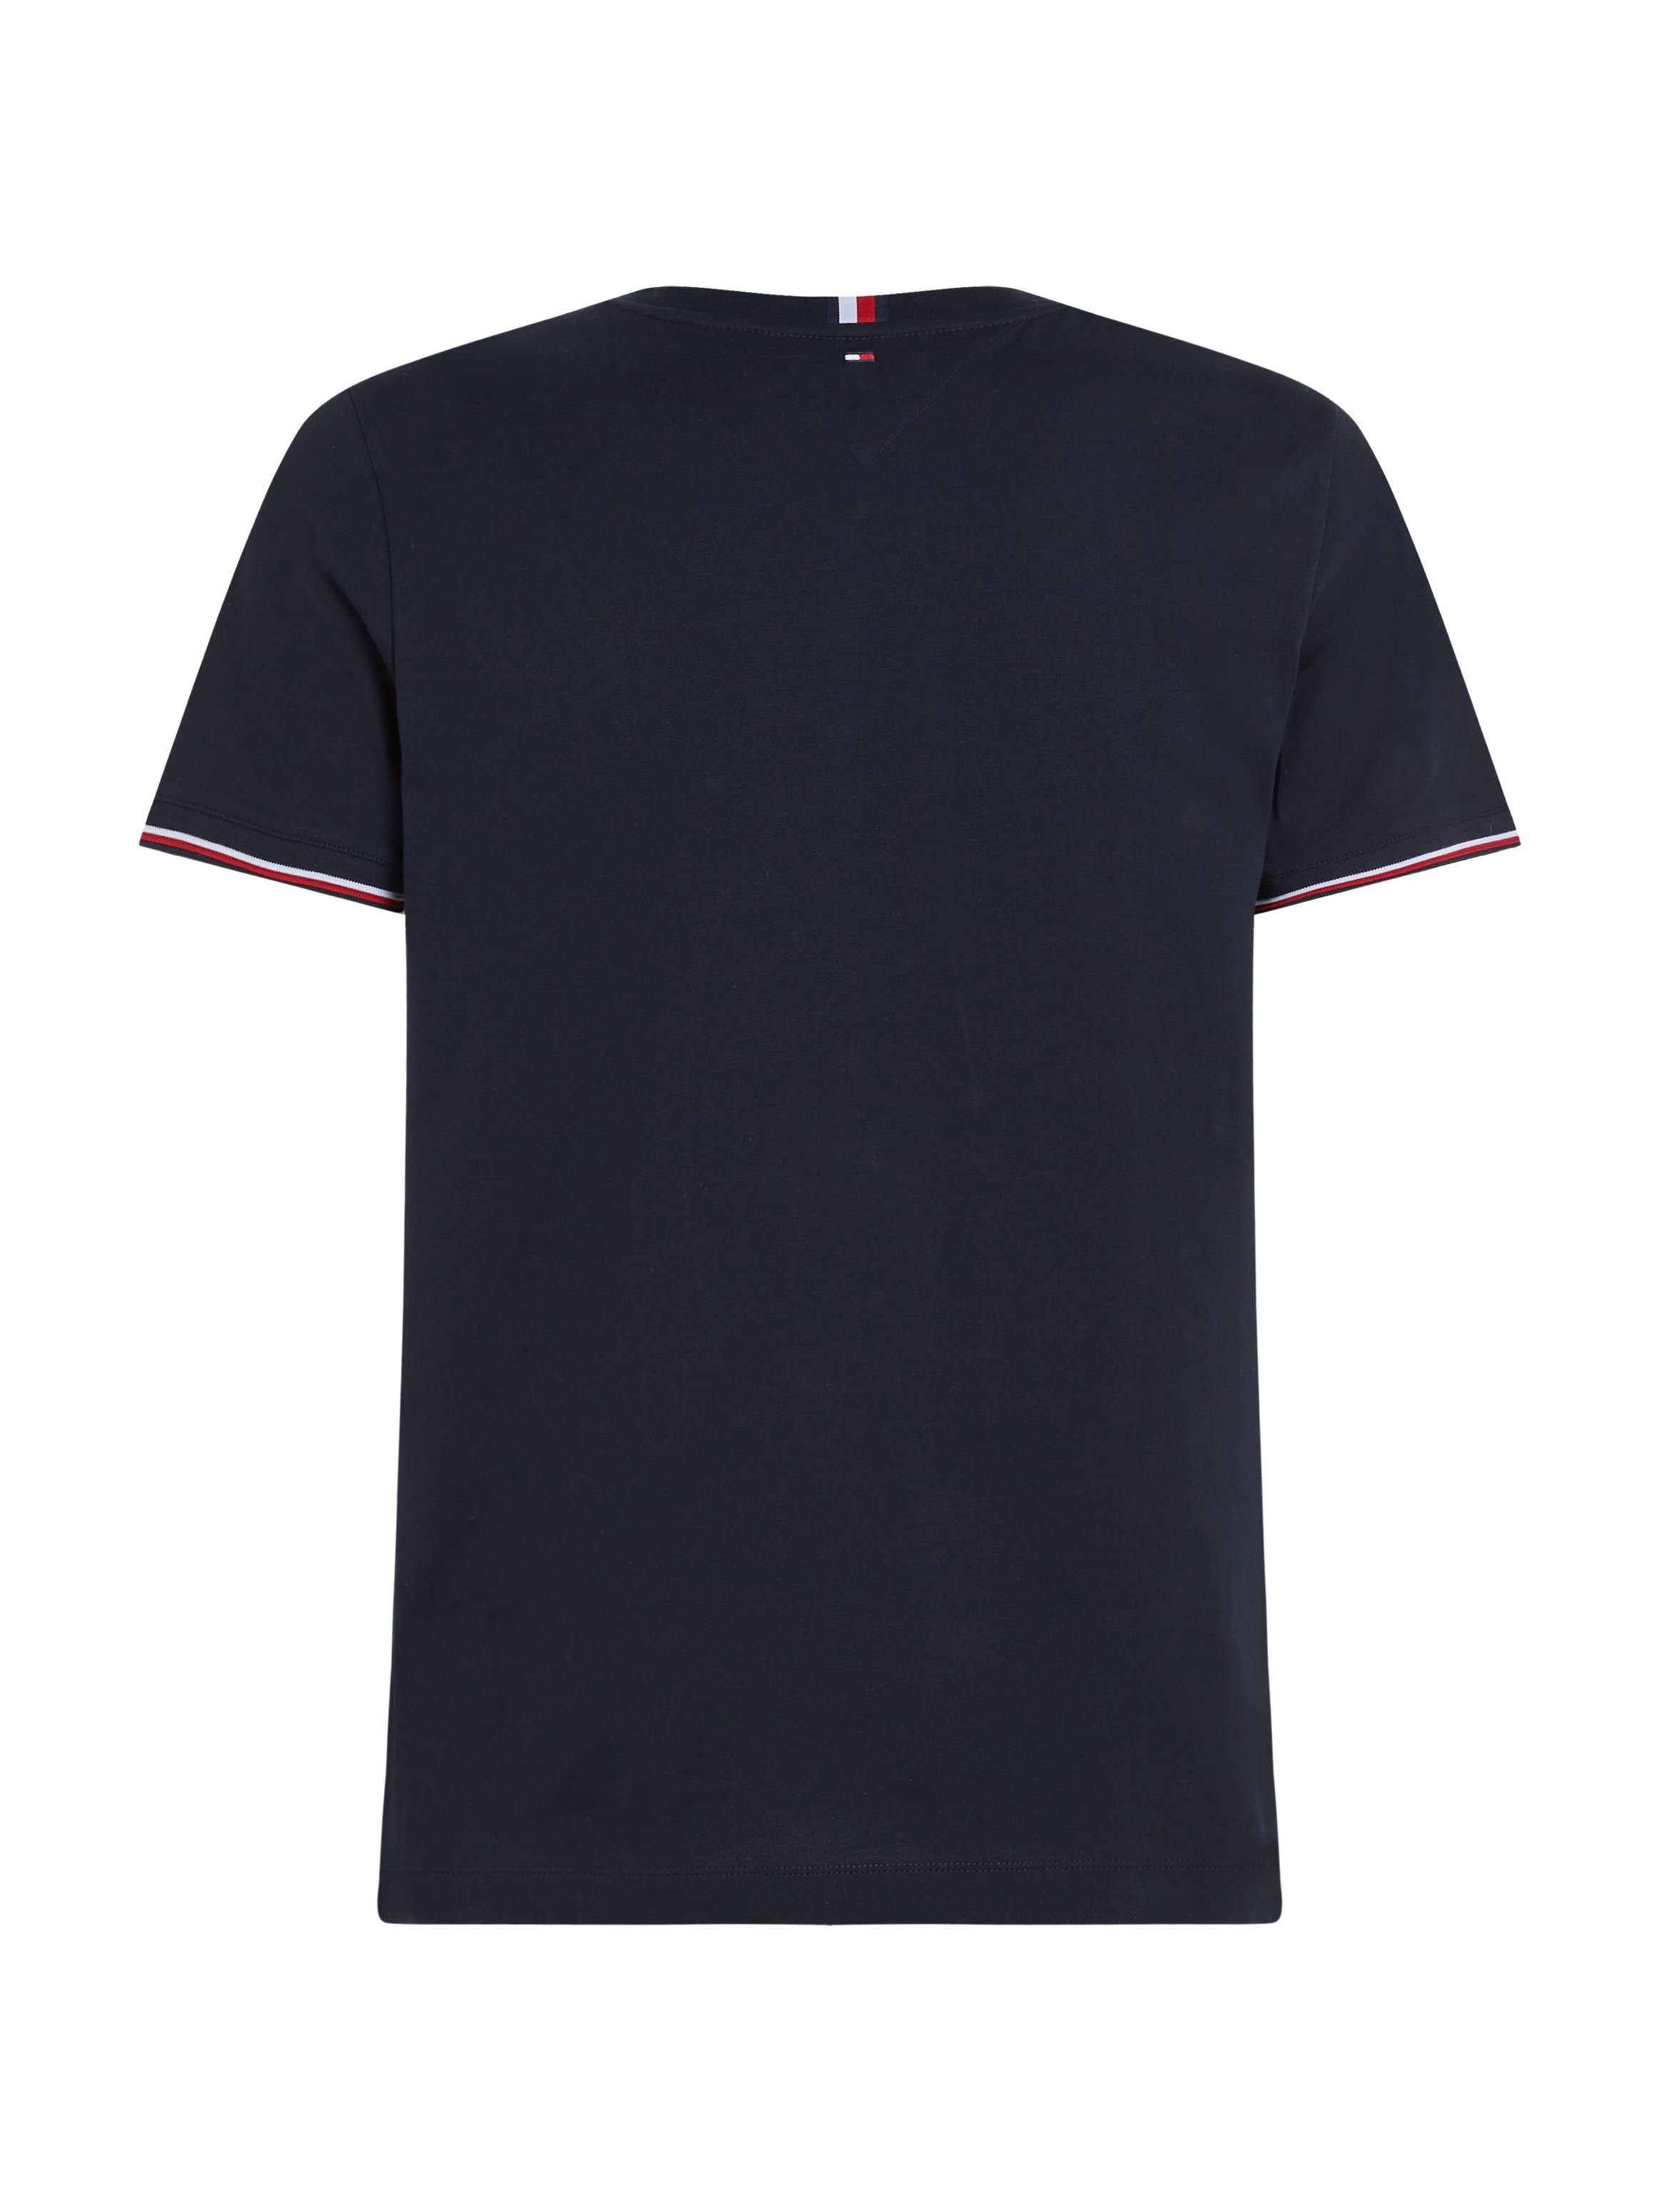 Desert LOGO TOMMY Hilfiger Tommy TEE TIPPED Sky T-Shirt